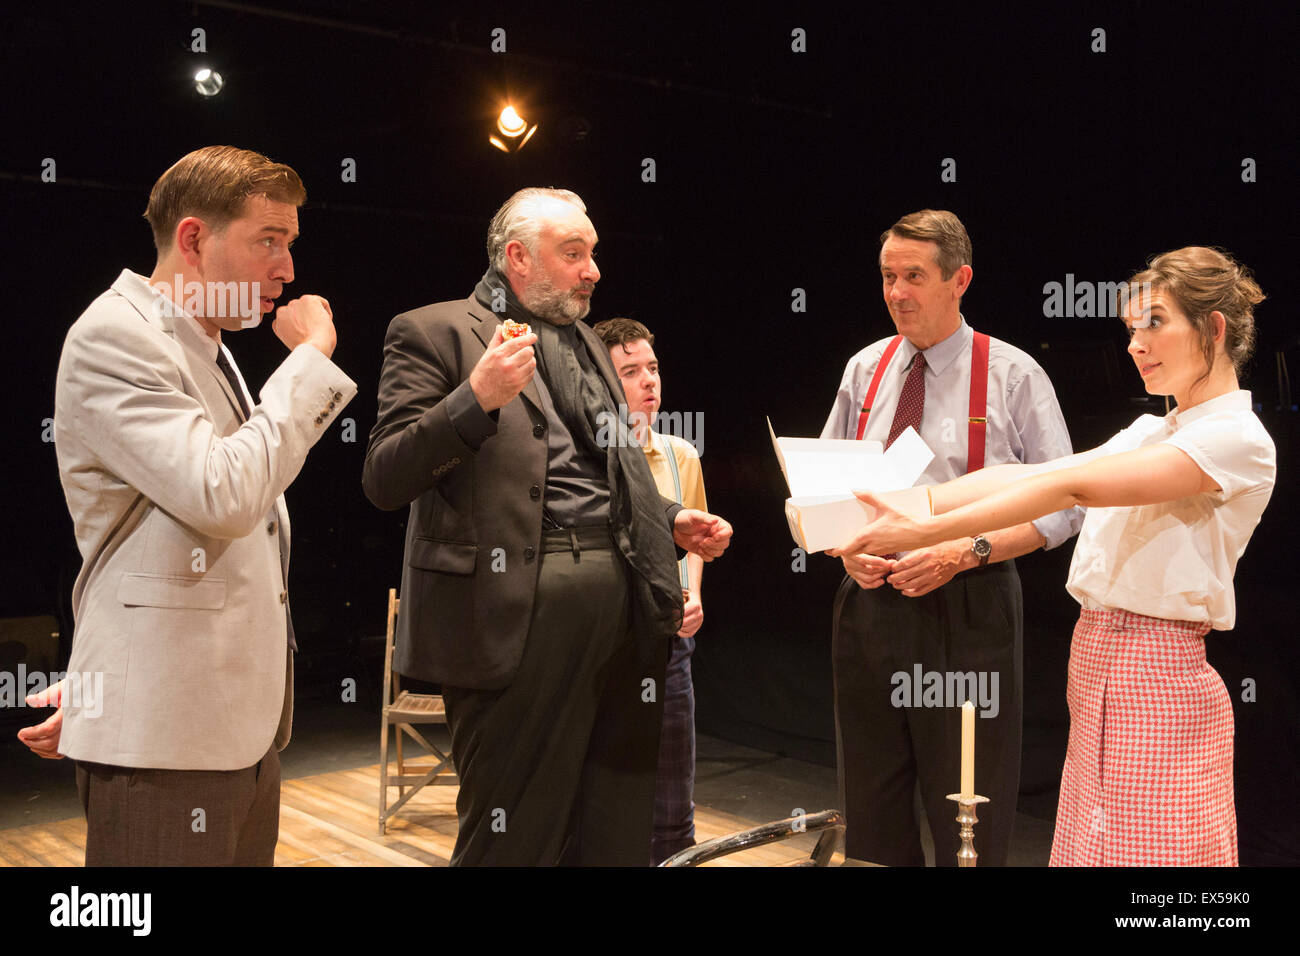 L-R: Edward Bennet as Kenneth Tynan, John Hodgkinson as Orson Welles, Ciaran O'Brien as Sean, Adrian Lukis as Laurence Olivier and Louise Ford as Joan Plowright. Photocall for the European Premiere of Orson's Shadow by Austin Pendleton at the Southwark Playhouse. The comedy, based on true events as Orson Wells and Laurence Olivier work together for the first time, runs from 1 to 25 July 2015. Stock Photo